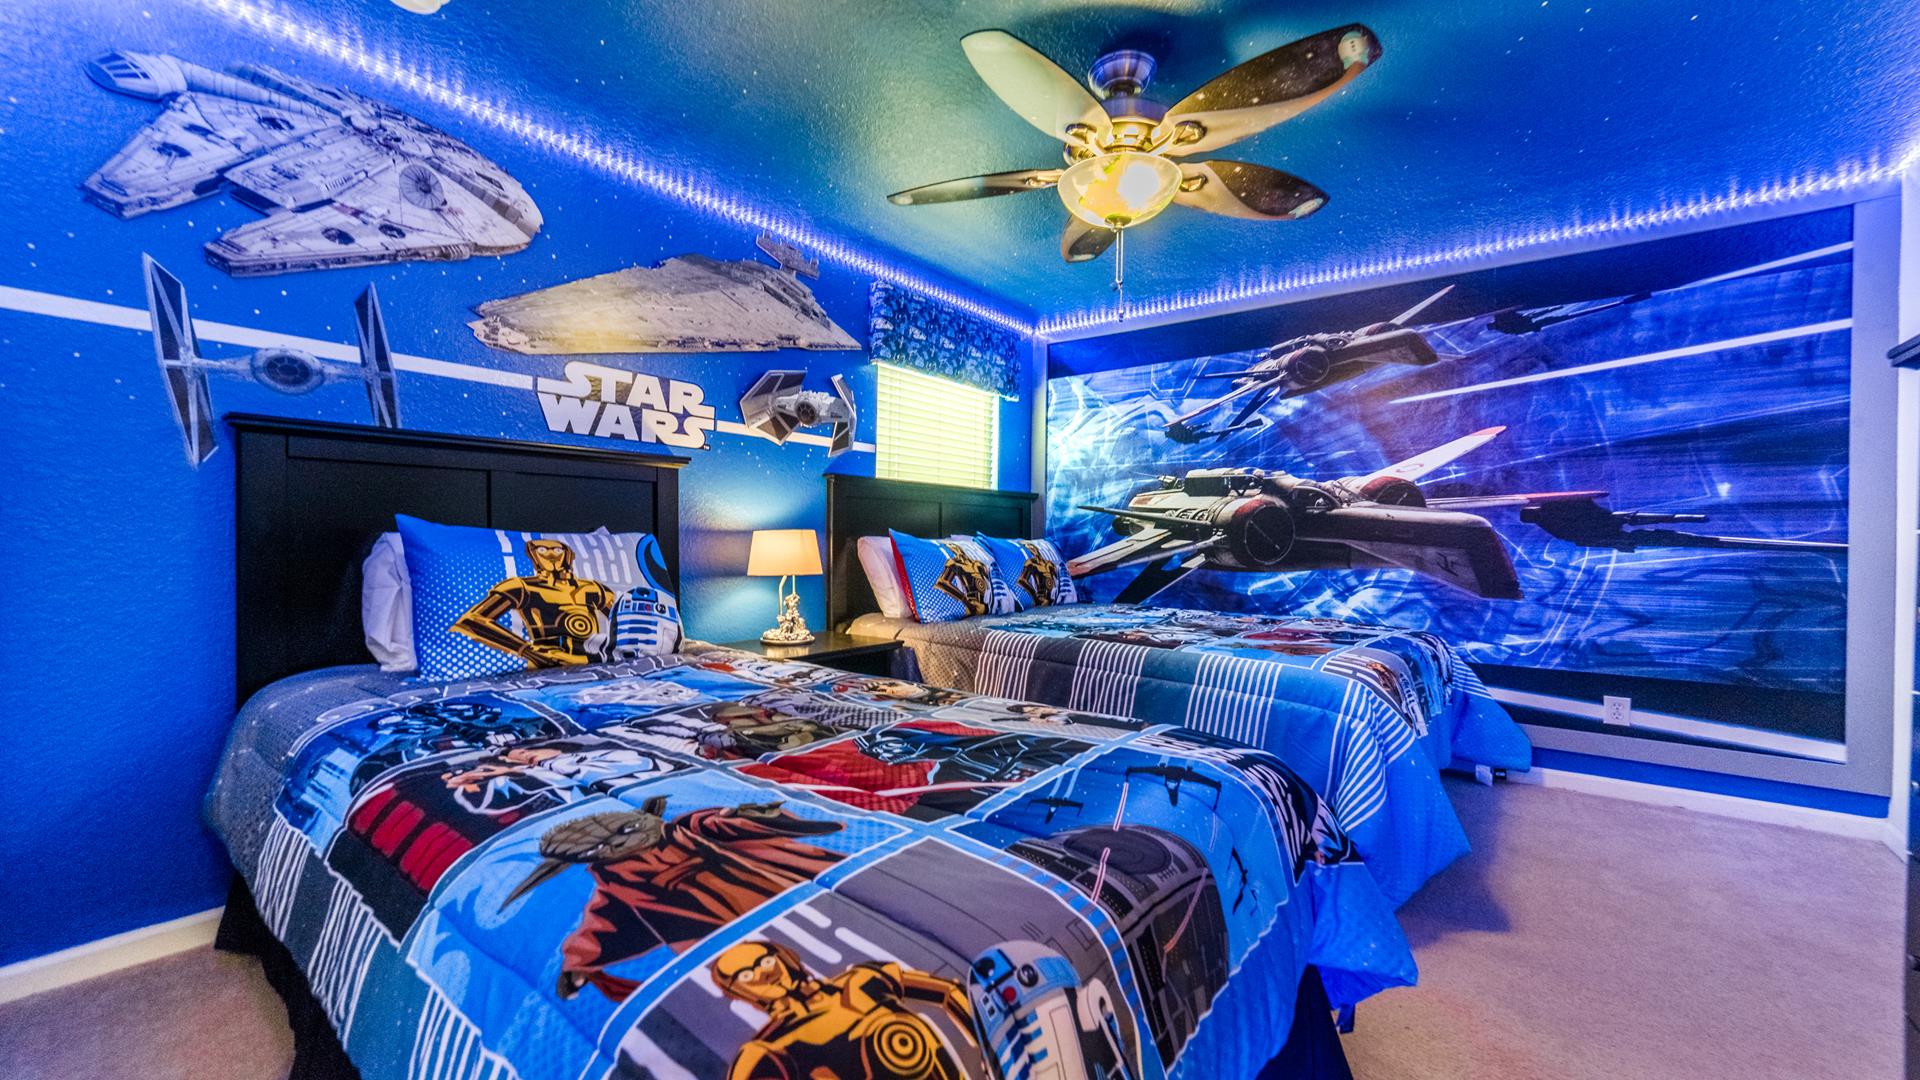 Kids will love the upstairs bedroom with a cool Star War theme